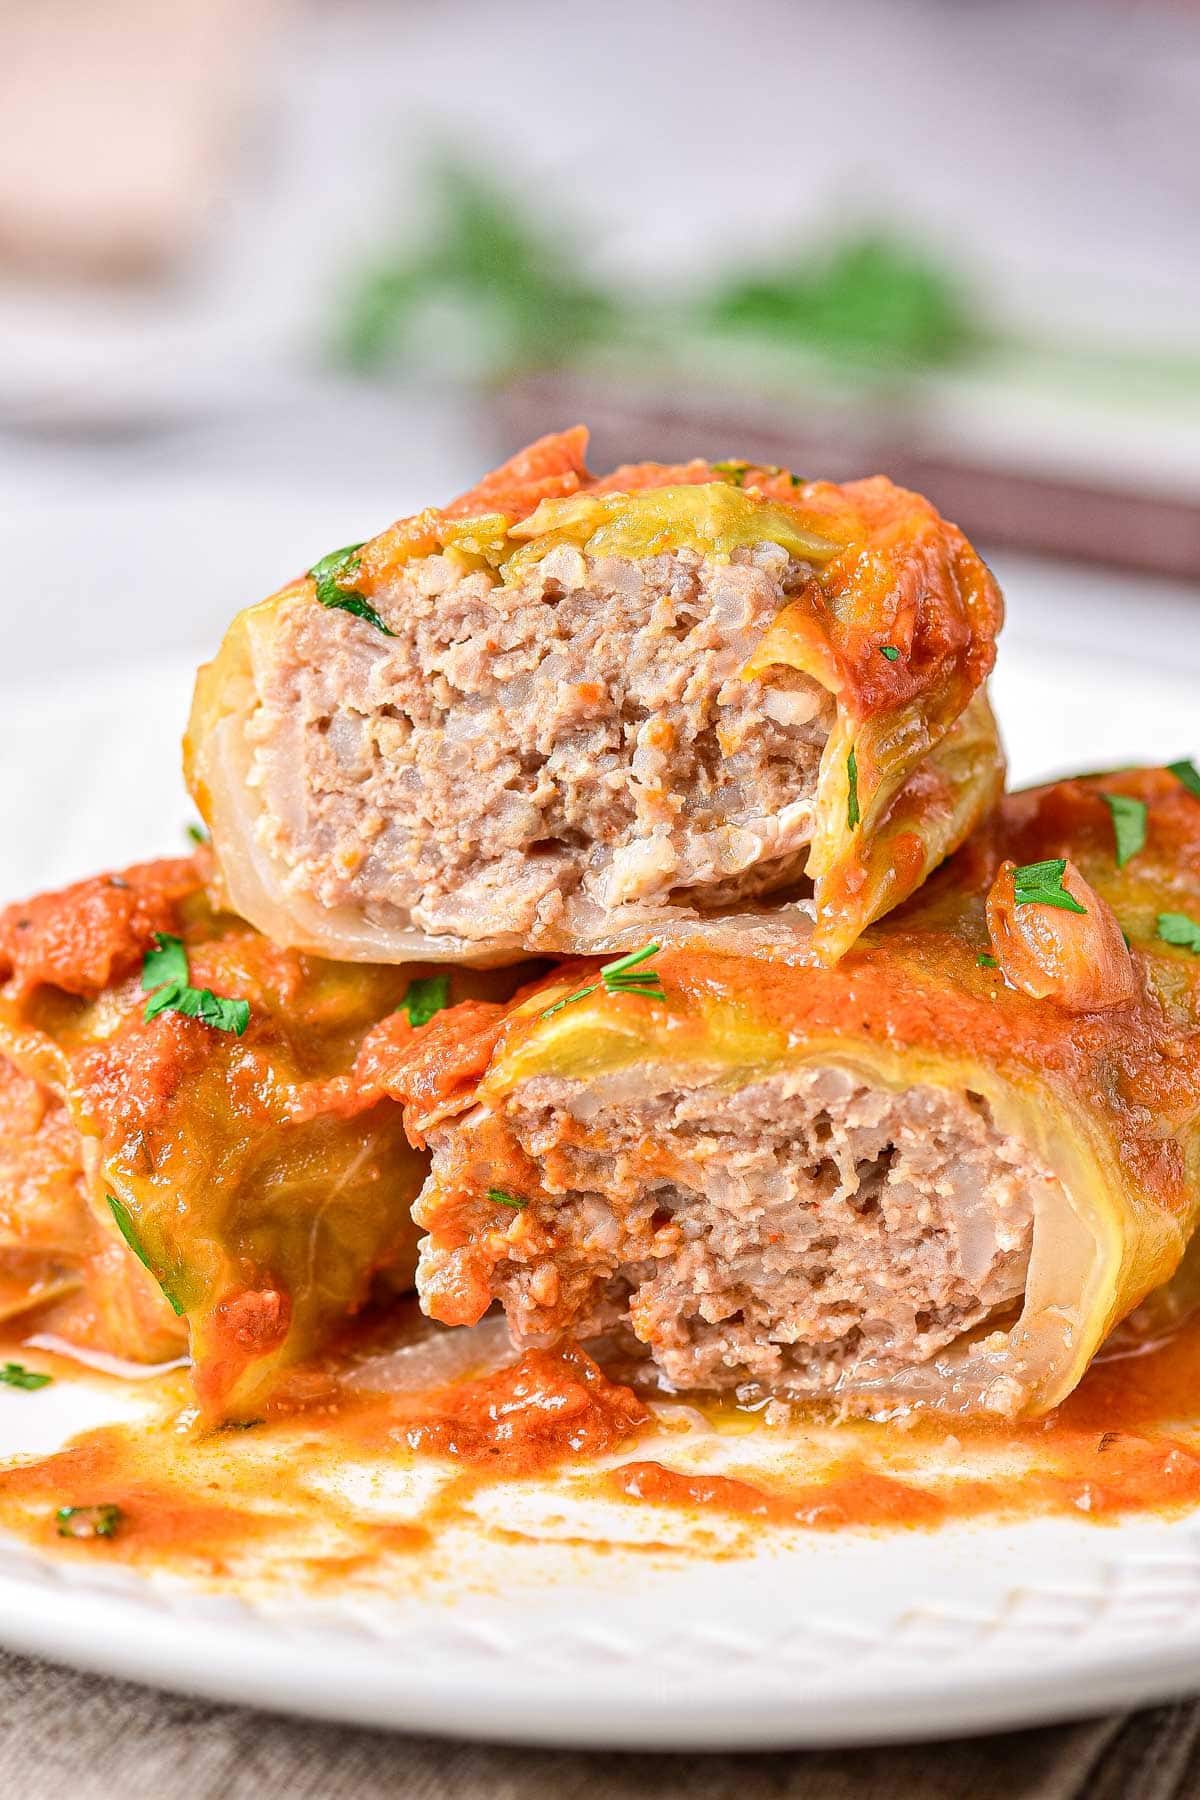 cabbage rolls stacked on plate and cut in half showing meat inside.